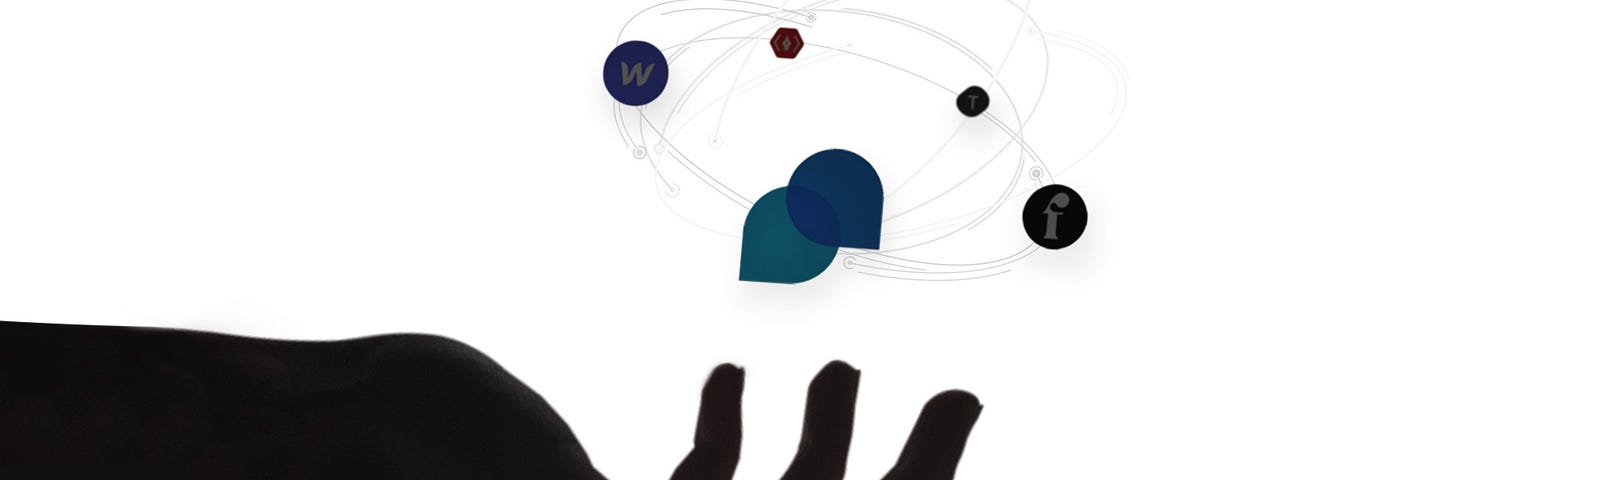 The silhouette of a dark hand with icons orbiting above it.